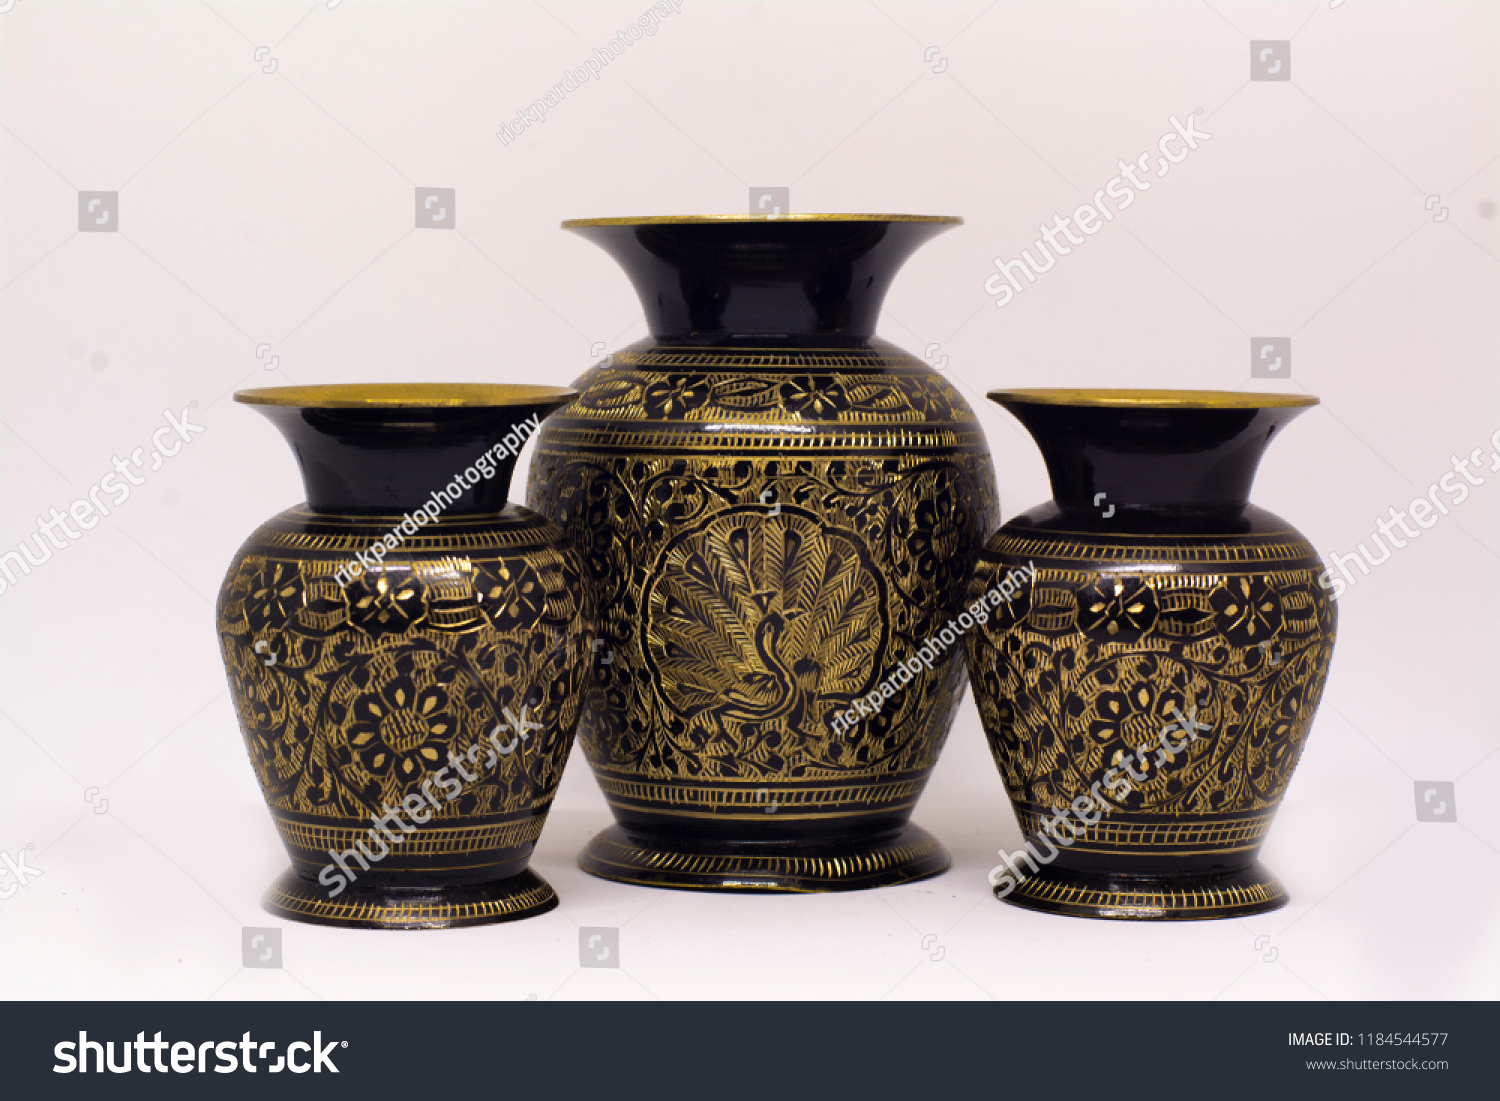 3 golden vases in a white background  #1184544577